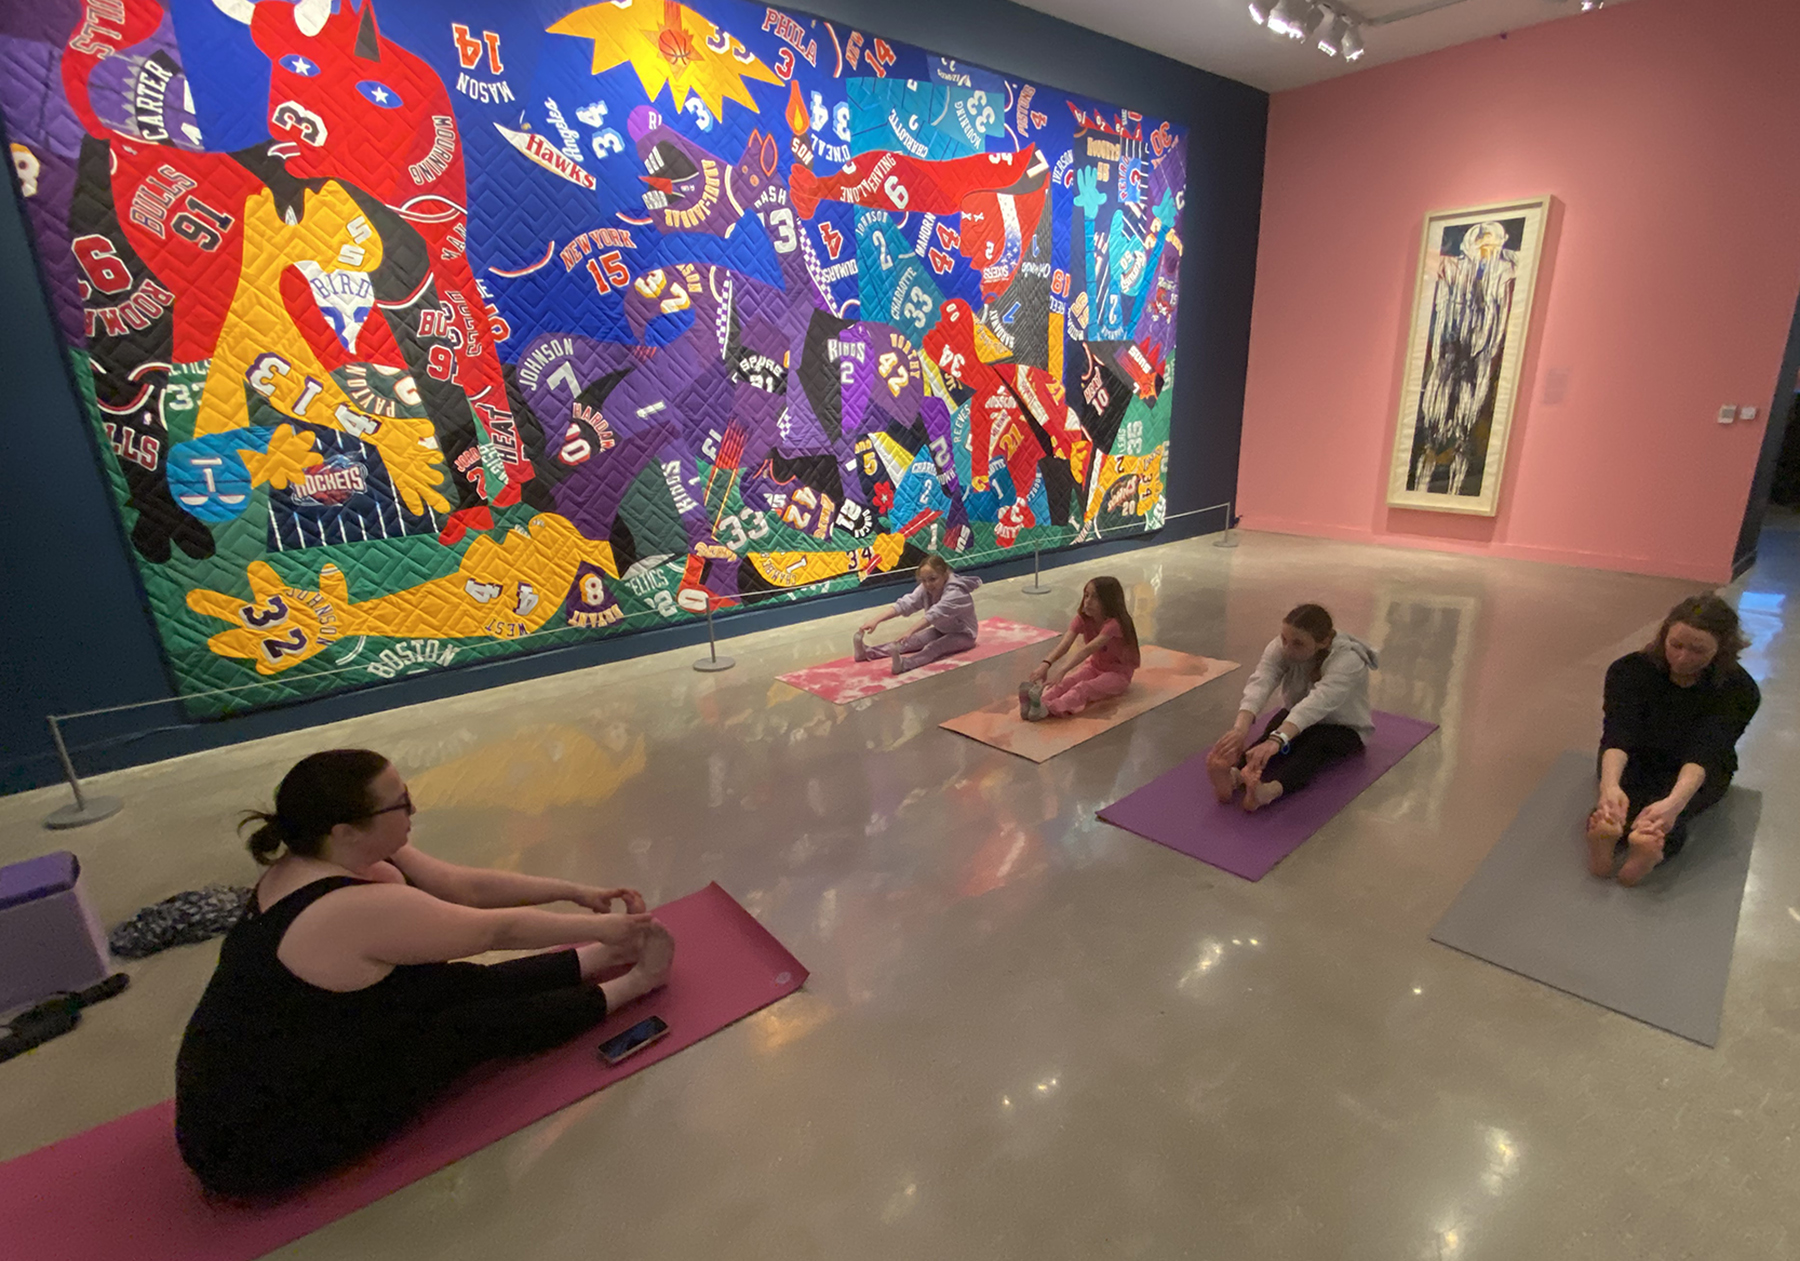 A yoga instructor leads three students in stretches in a gallery.